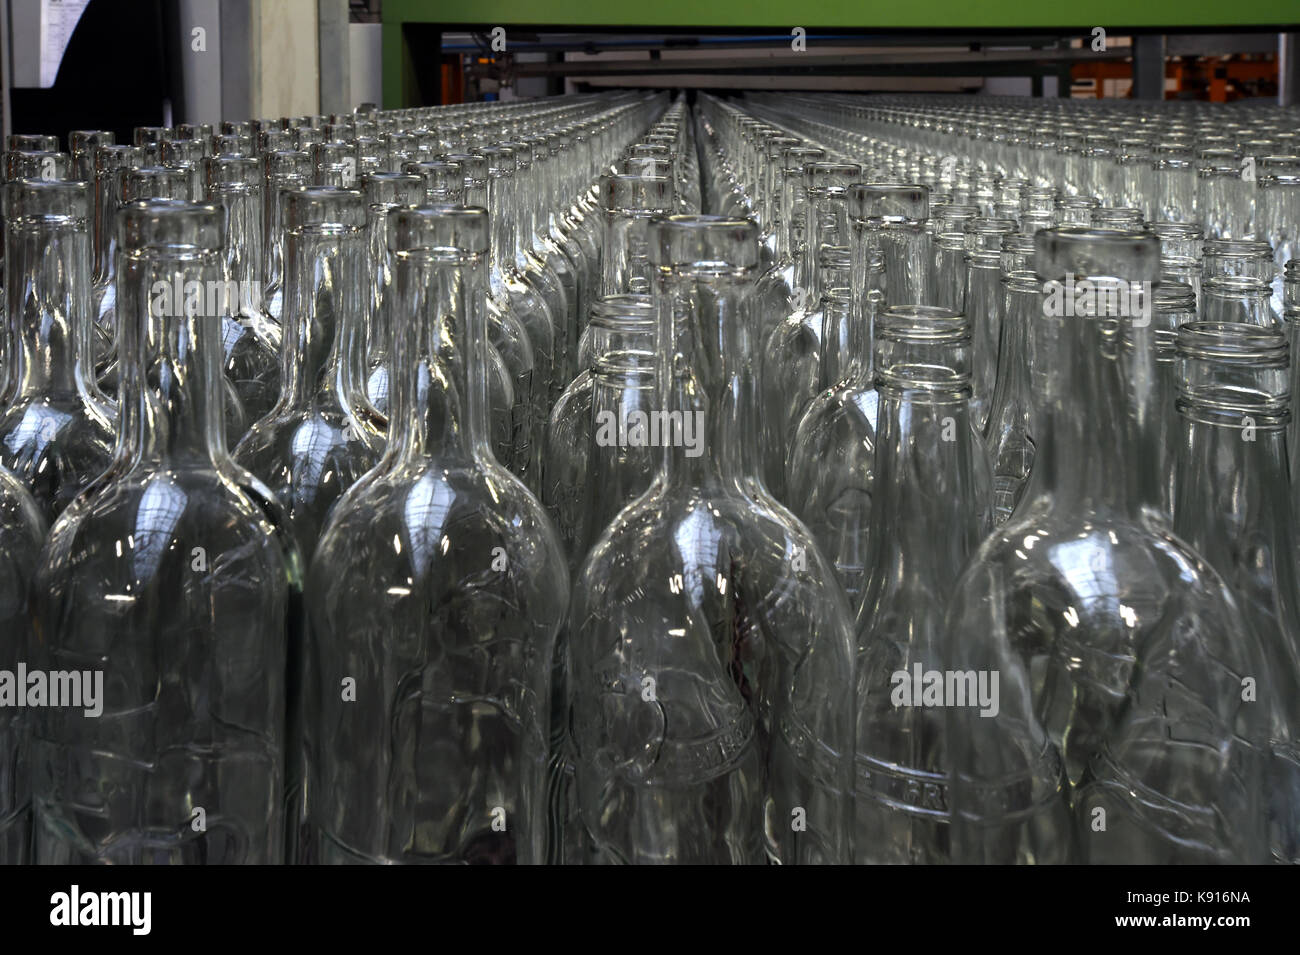 Owens-Illinois company has officially launched its a new operation modern technology in its factory in Dubi, Czech Republic, on September 21, 2017. An investment of more than 700 million crowns will speed up the production of packaging glass, which has been produced in Dubi since 1908. Every day 600,000 bottles or glasses are produced in continuous operation. Making one bottle from the drop of glass to the expedition takes about 110 minutes. The company is the largest manufacturer of glass containers in the world, employing almost 400 people in the Czech Republic. The picture shows bottles pro Stock Photo